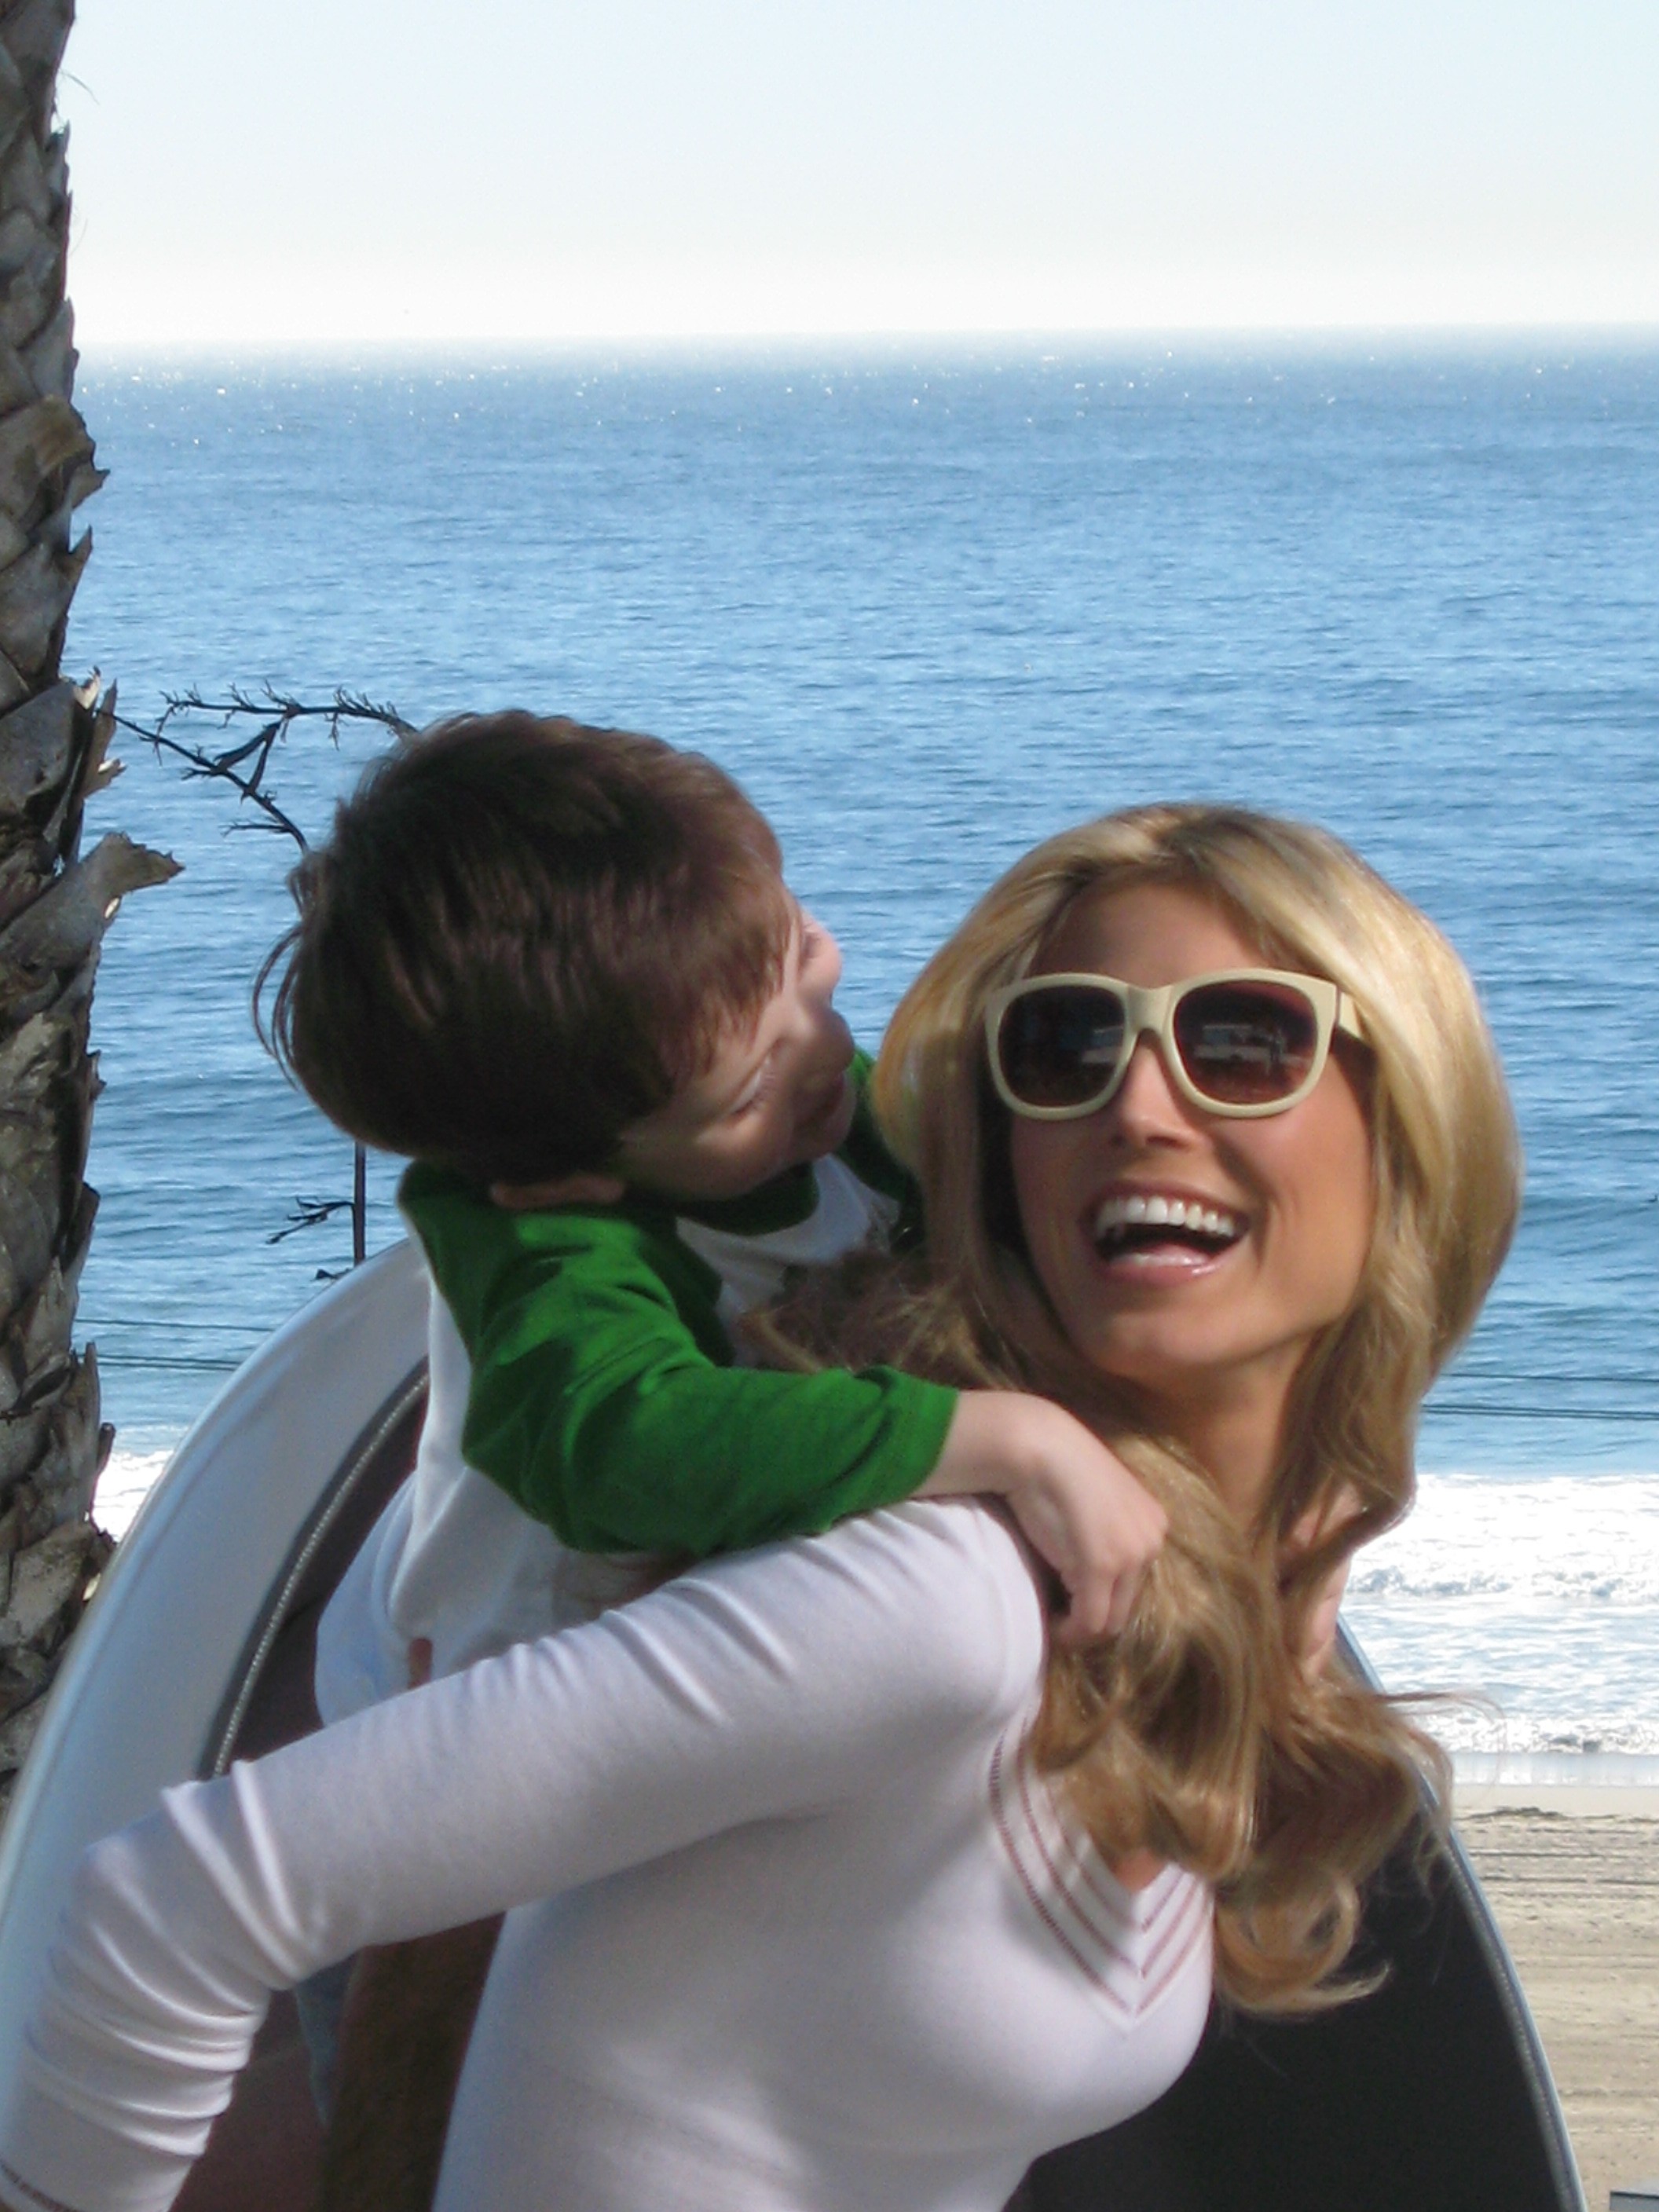 Griffin with Heidi Klum for the Schwartzkopf-Taft Commercial shot in Malibu, CA.